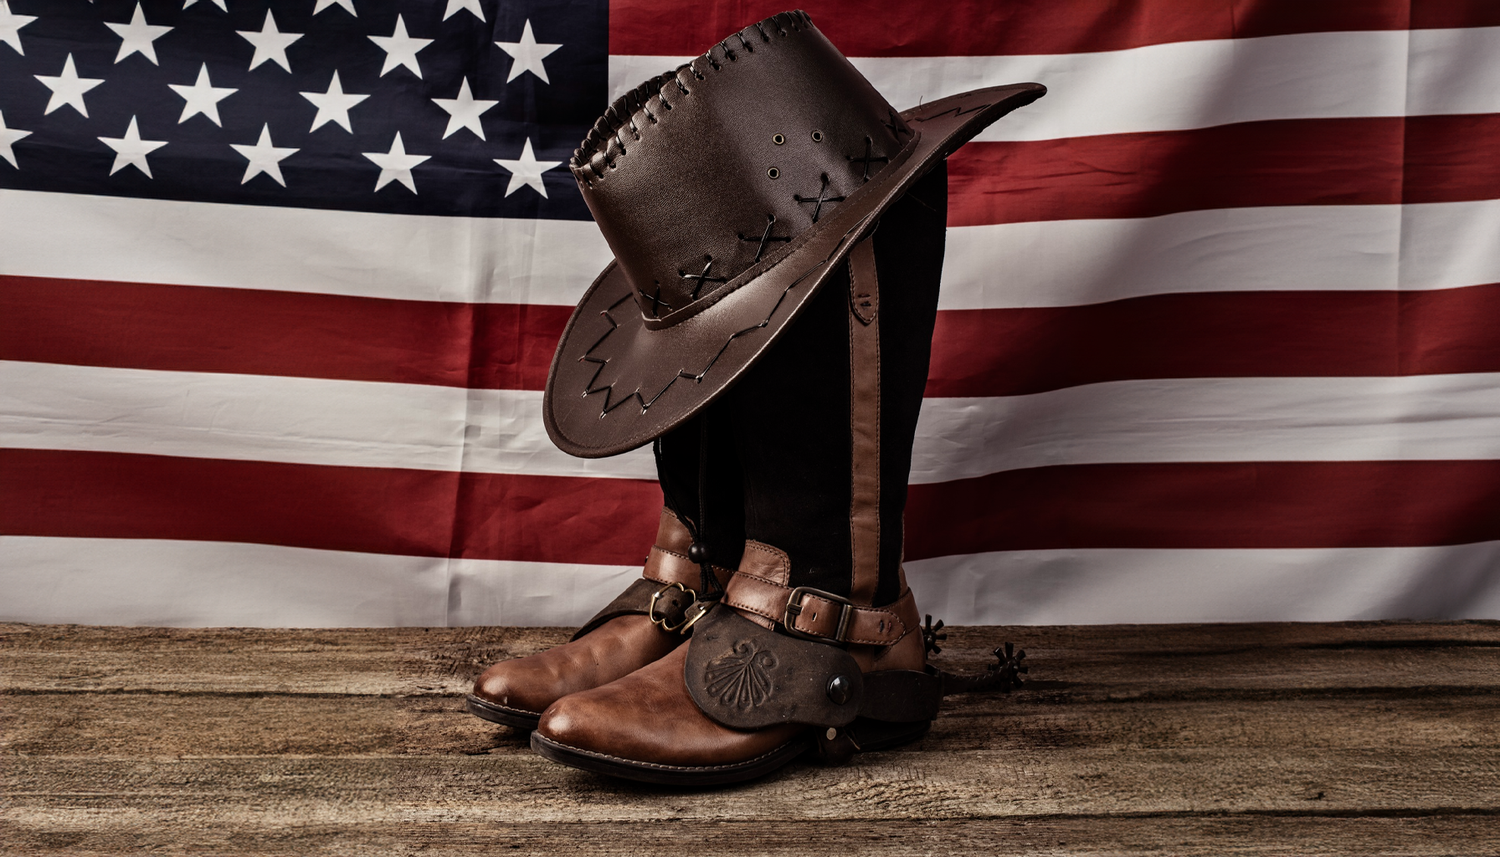 Stars, Stripes, and Cowboy Boots: Western Footwear for the 4th of July